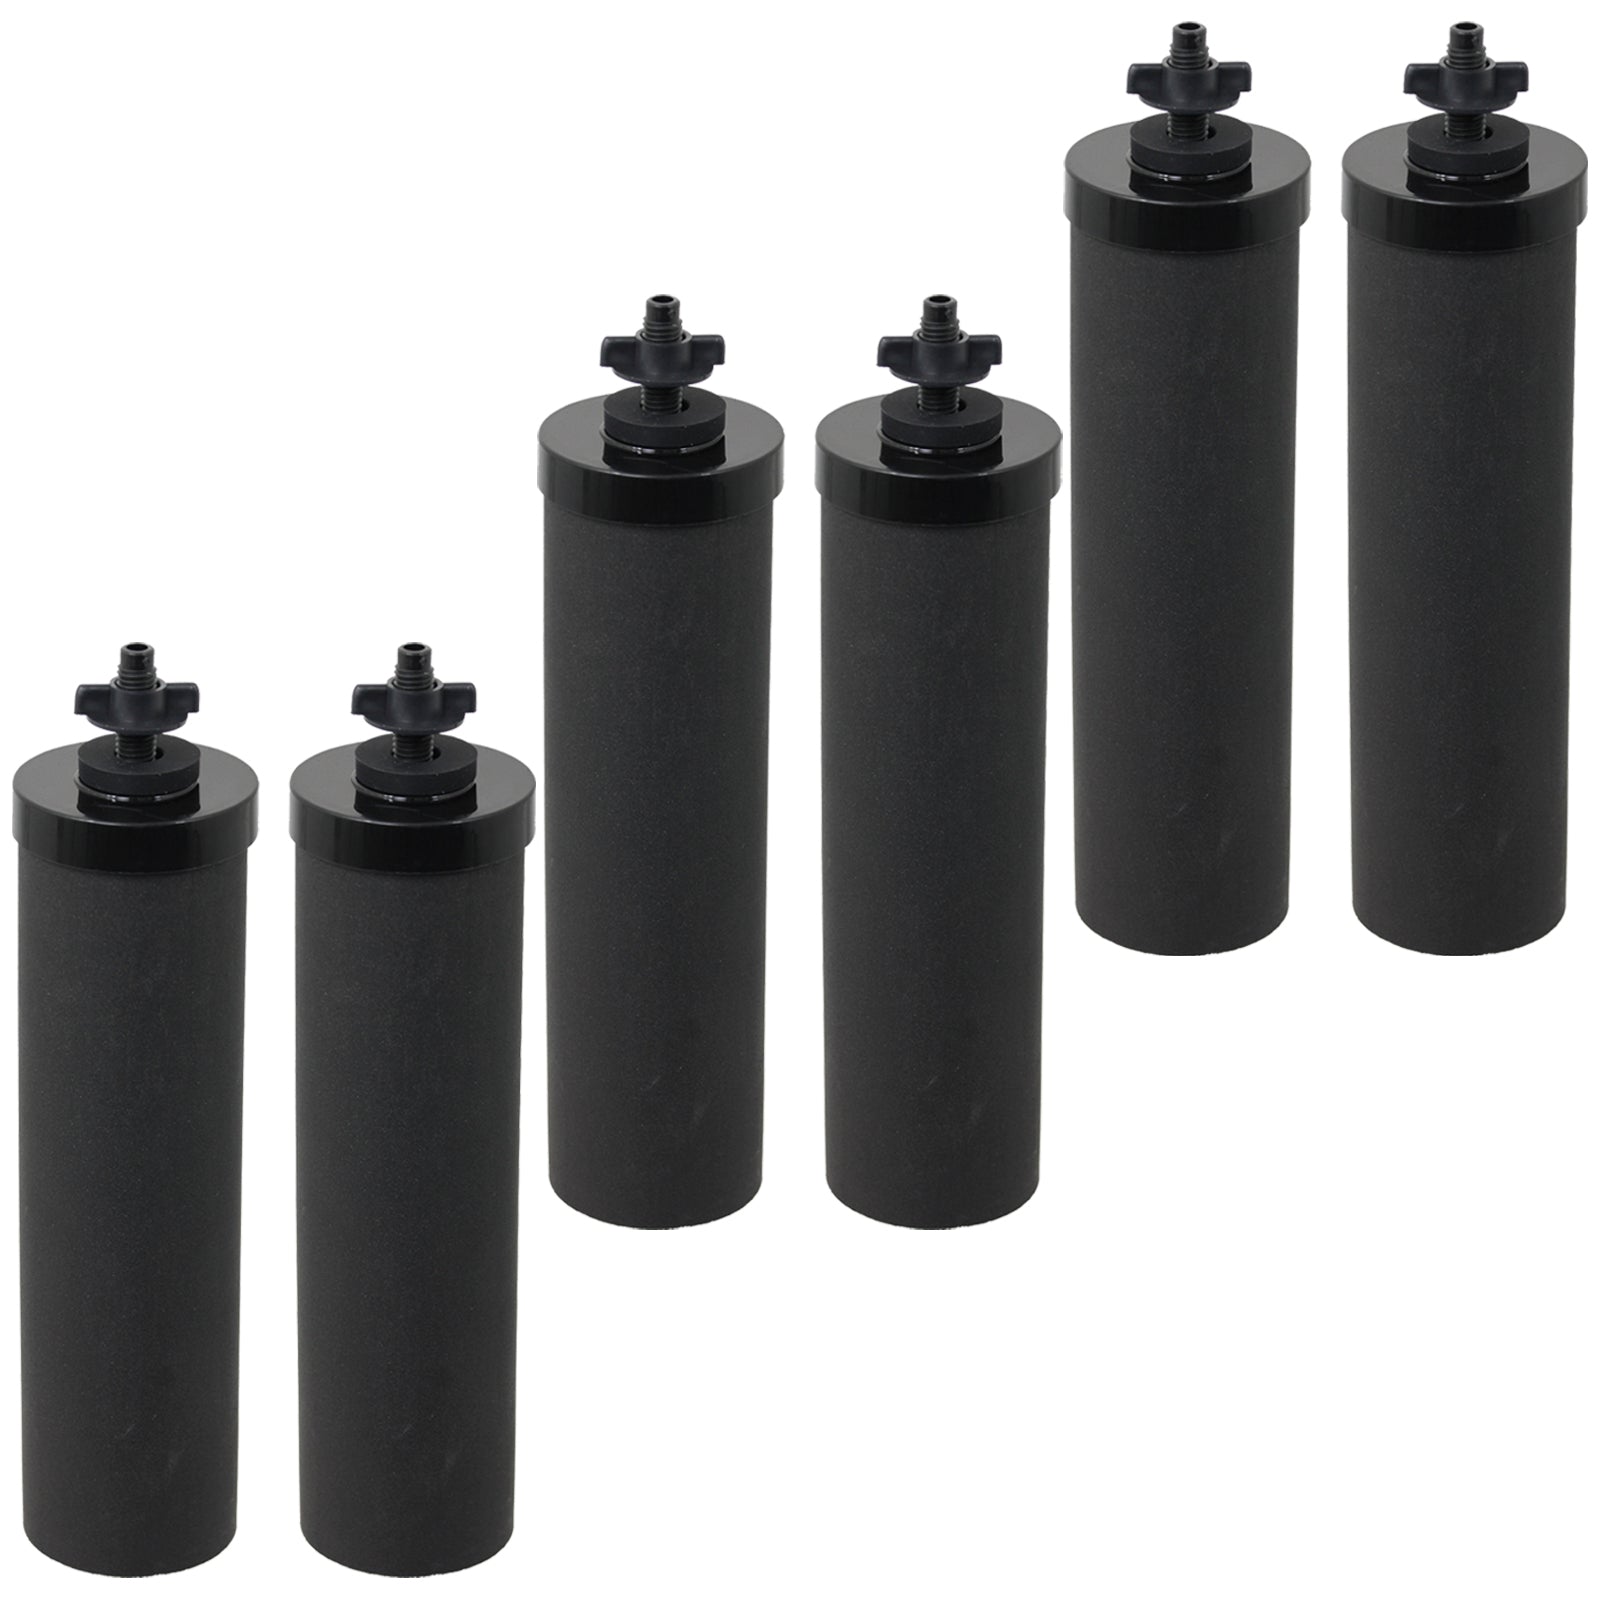 Water Filter Element for BERKEY Purification System Cartridge Filters Black x 6